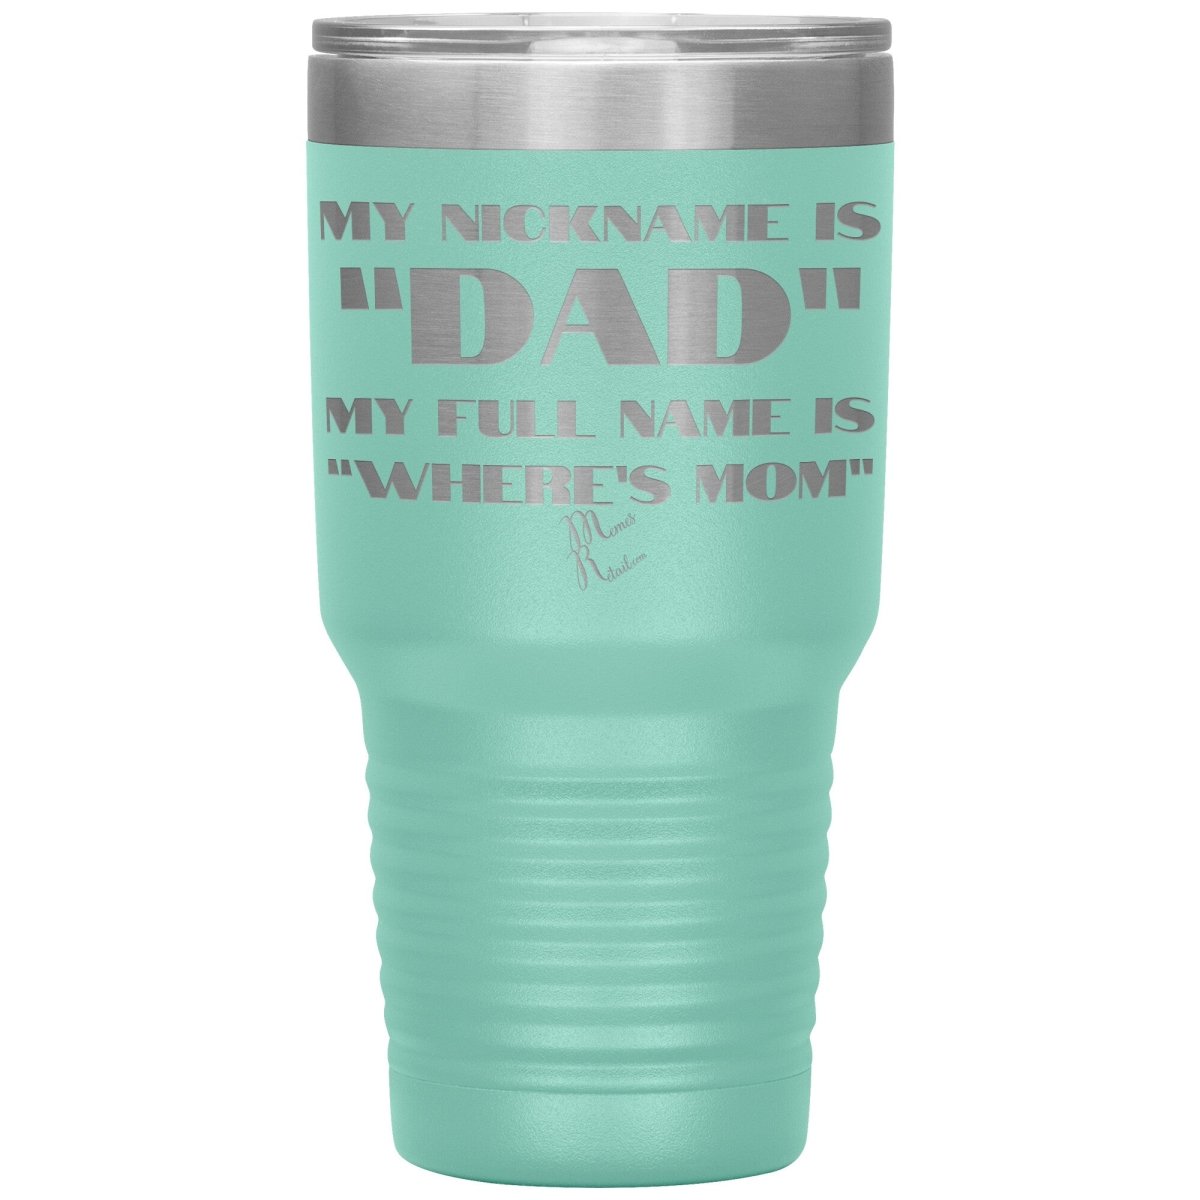 My Nickname is "Dad", My Full Name is "Where's Mom" Tumblers, 30oz Insulated Tumbler / Teal - MemesRetail.com